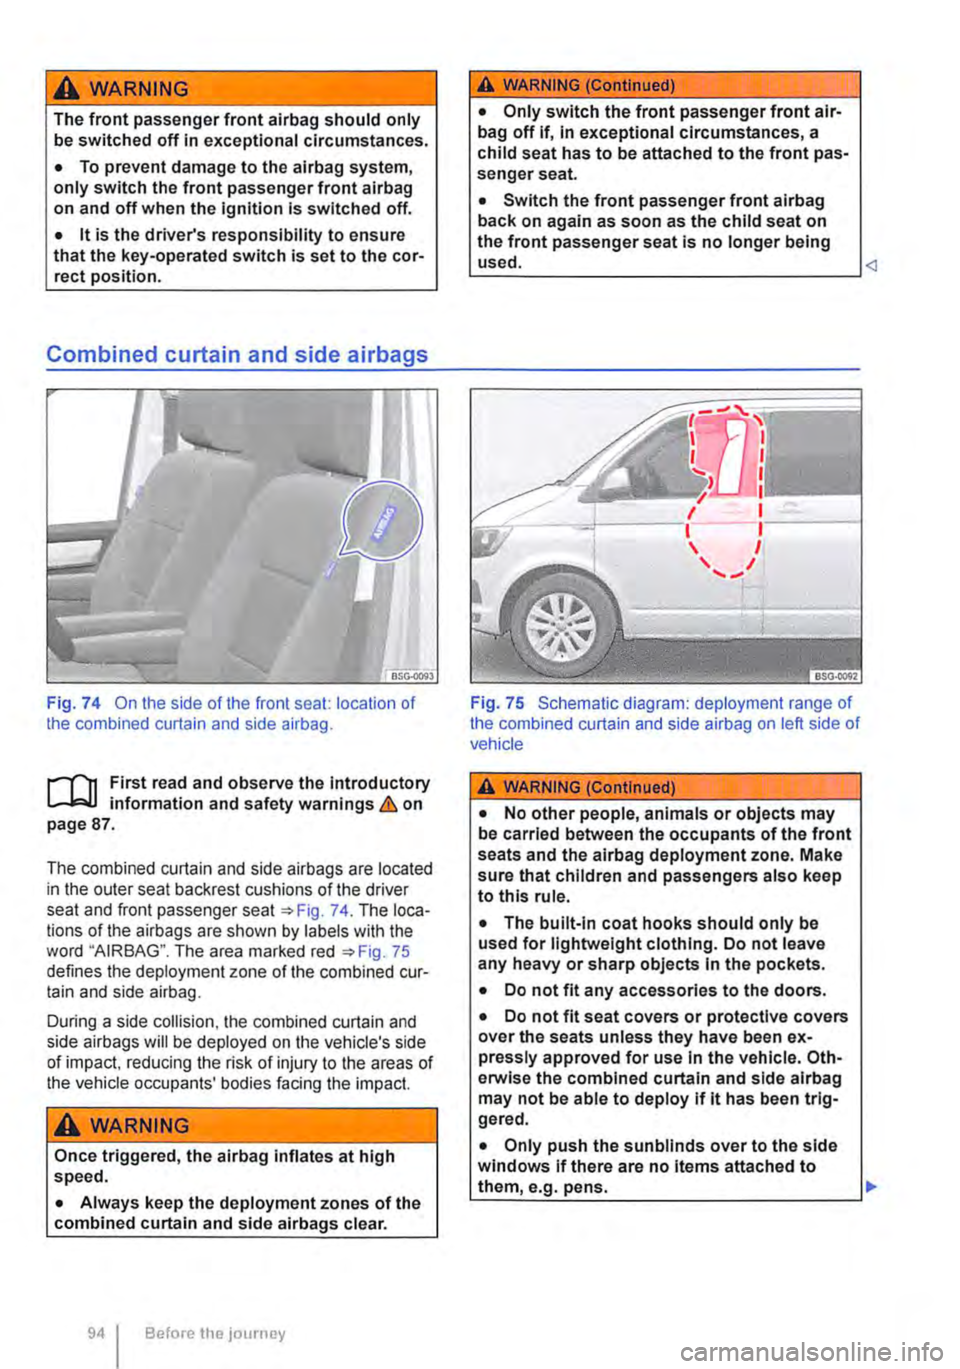 VOLKSWAGEN TRANSPORTER 2013  Owners Manual A WARNING 
The front passenger front airbag should only be switched off in exceptional circumstances. 
• To prevent damage to the airbag system, only switch the front passenger front airbag on and o